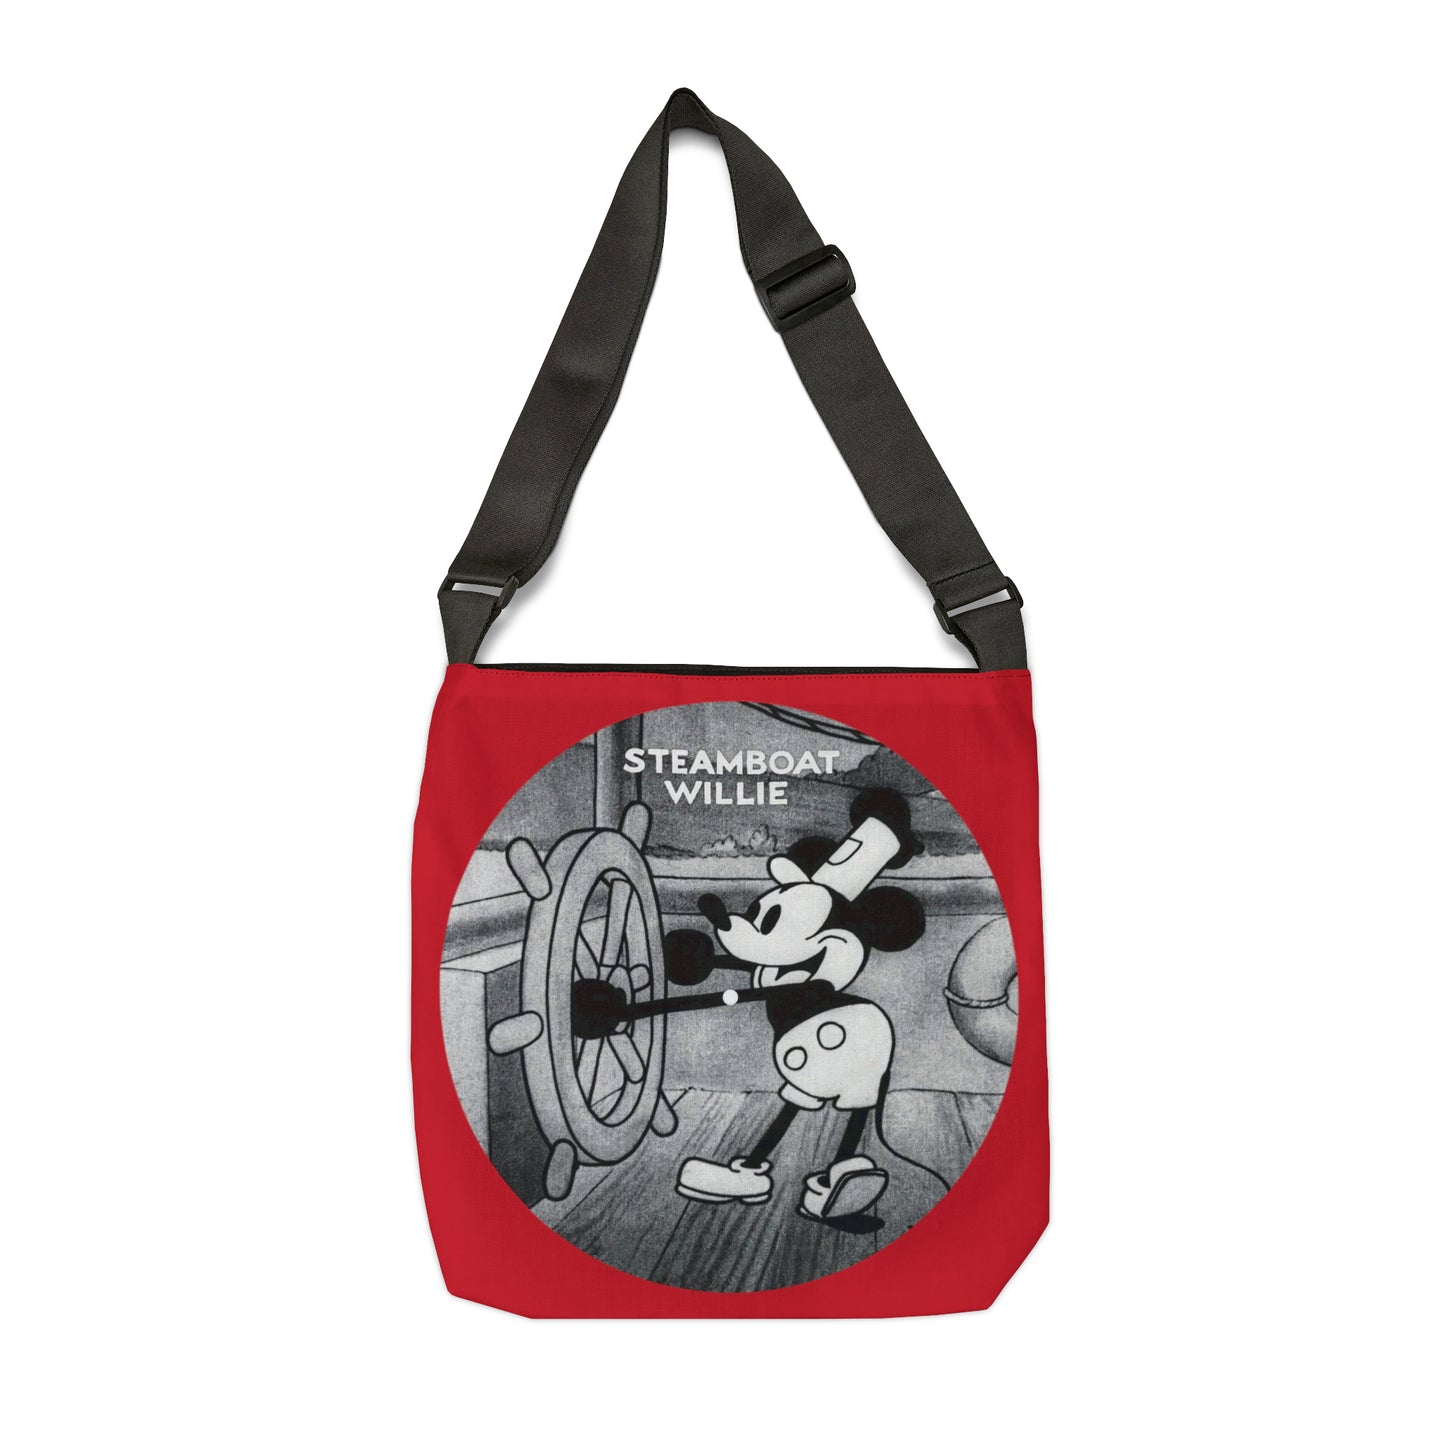 "Steamboat Willie" Adjustable Tote Bag (AOP), Available in 2 Sizes, Adjustable Strap, Zippered Pocket